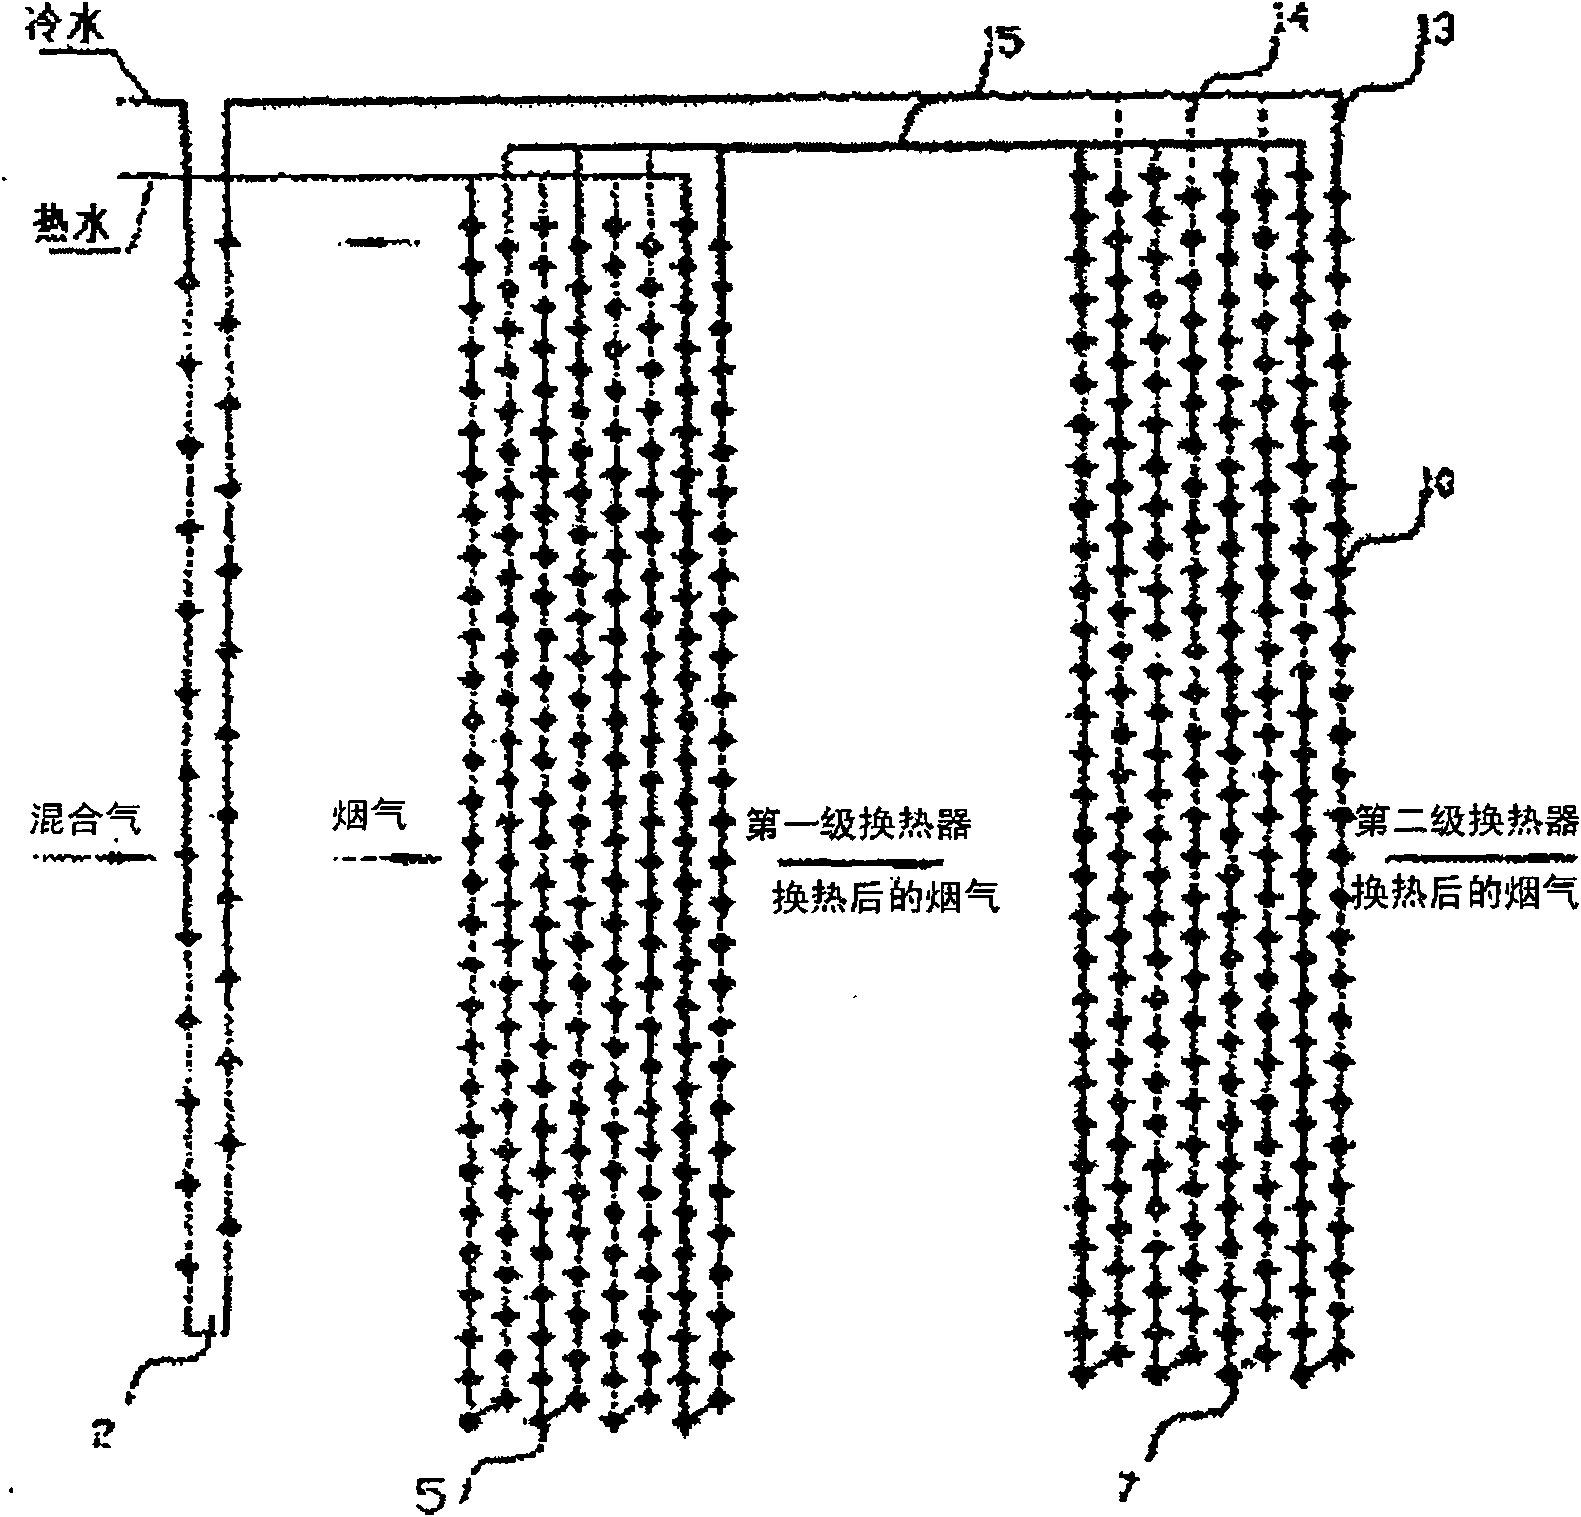 Flameless catalytic combustion condensing boiler with near zero pollutant discharge